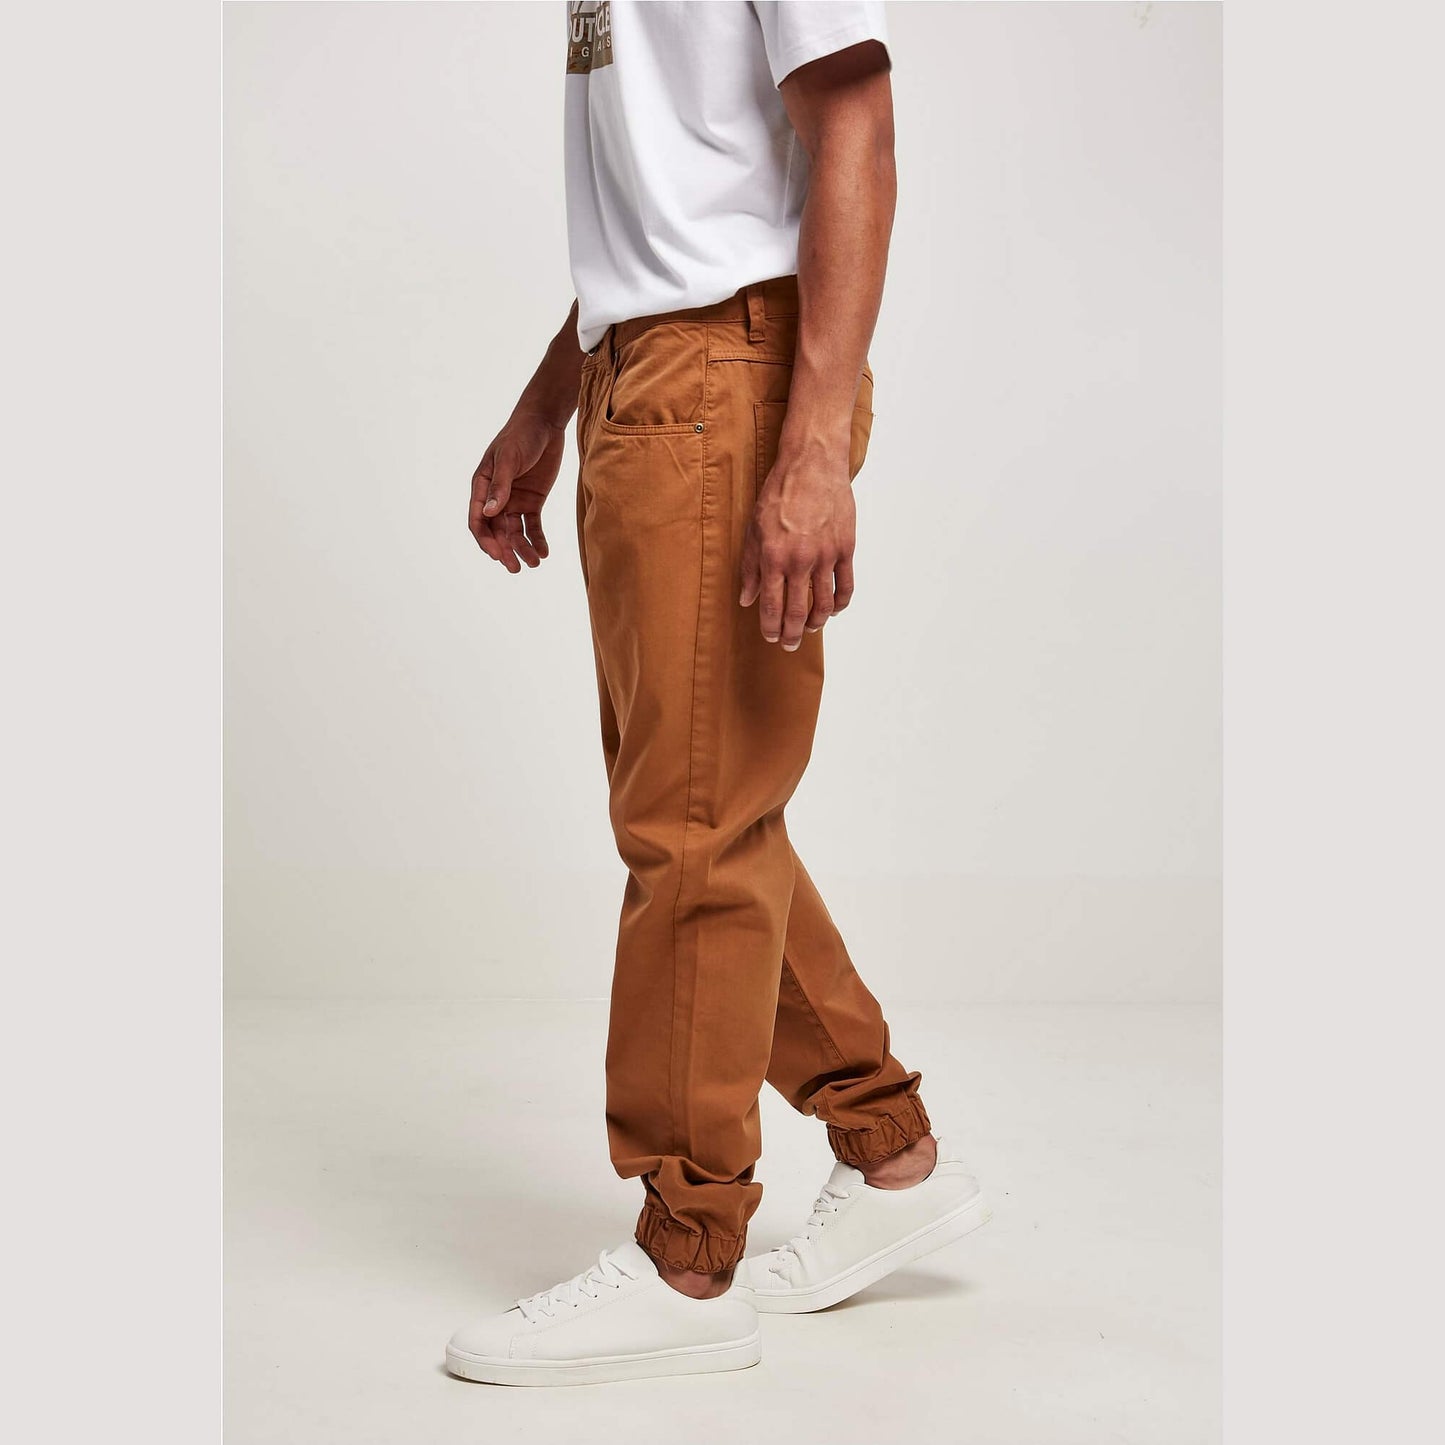 Southpole Script Twill Pants Toffee